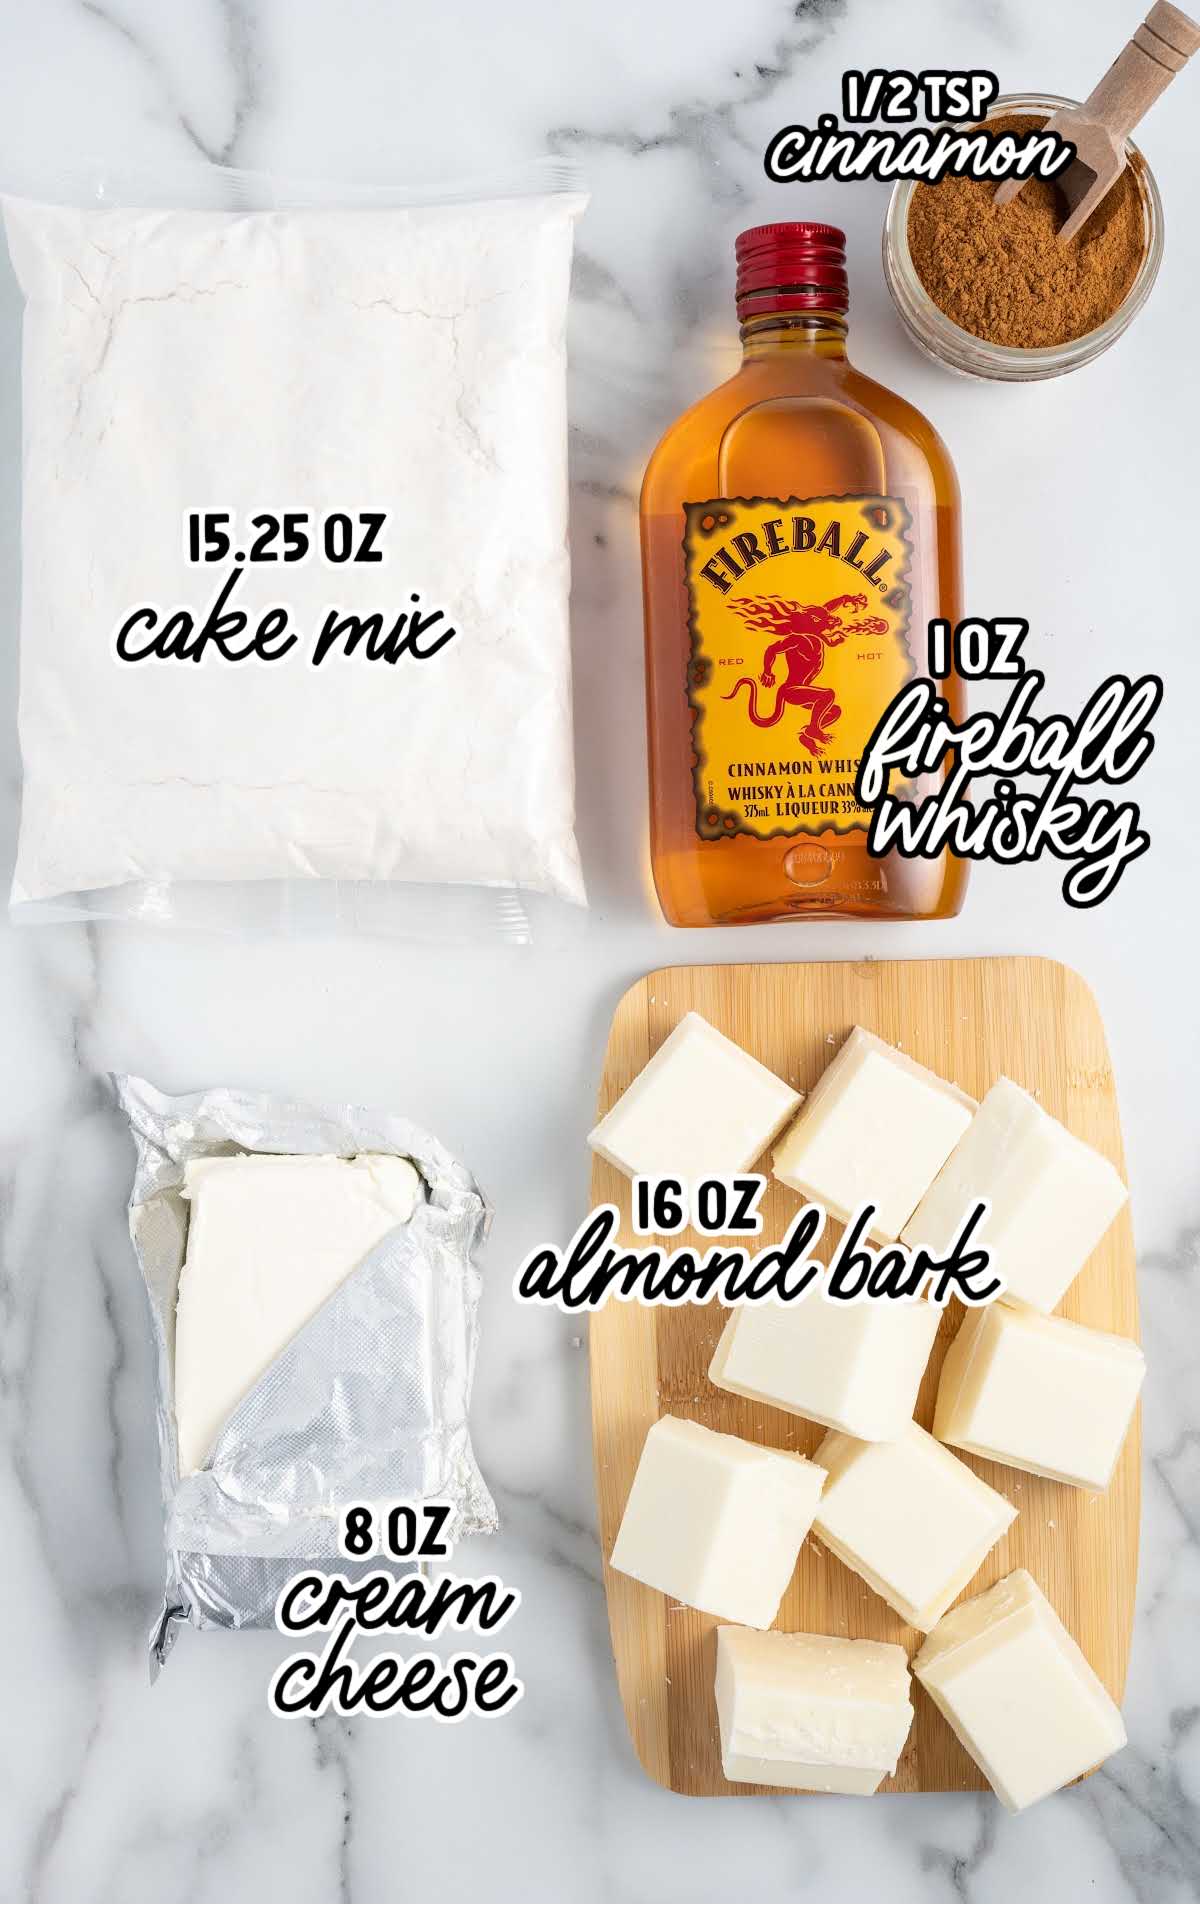 Fireball Whisky Balls raw ingredients that are labeled